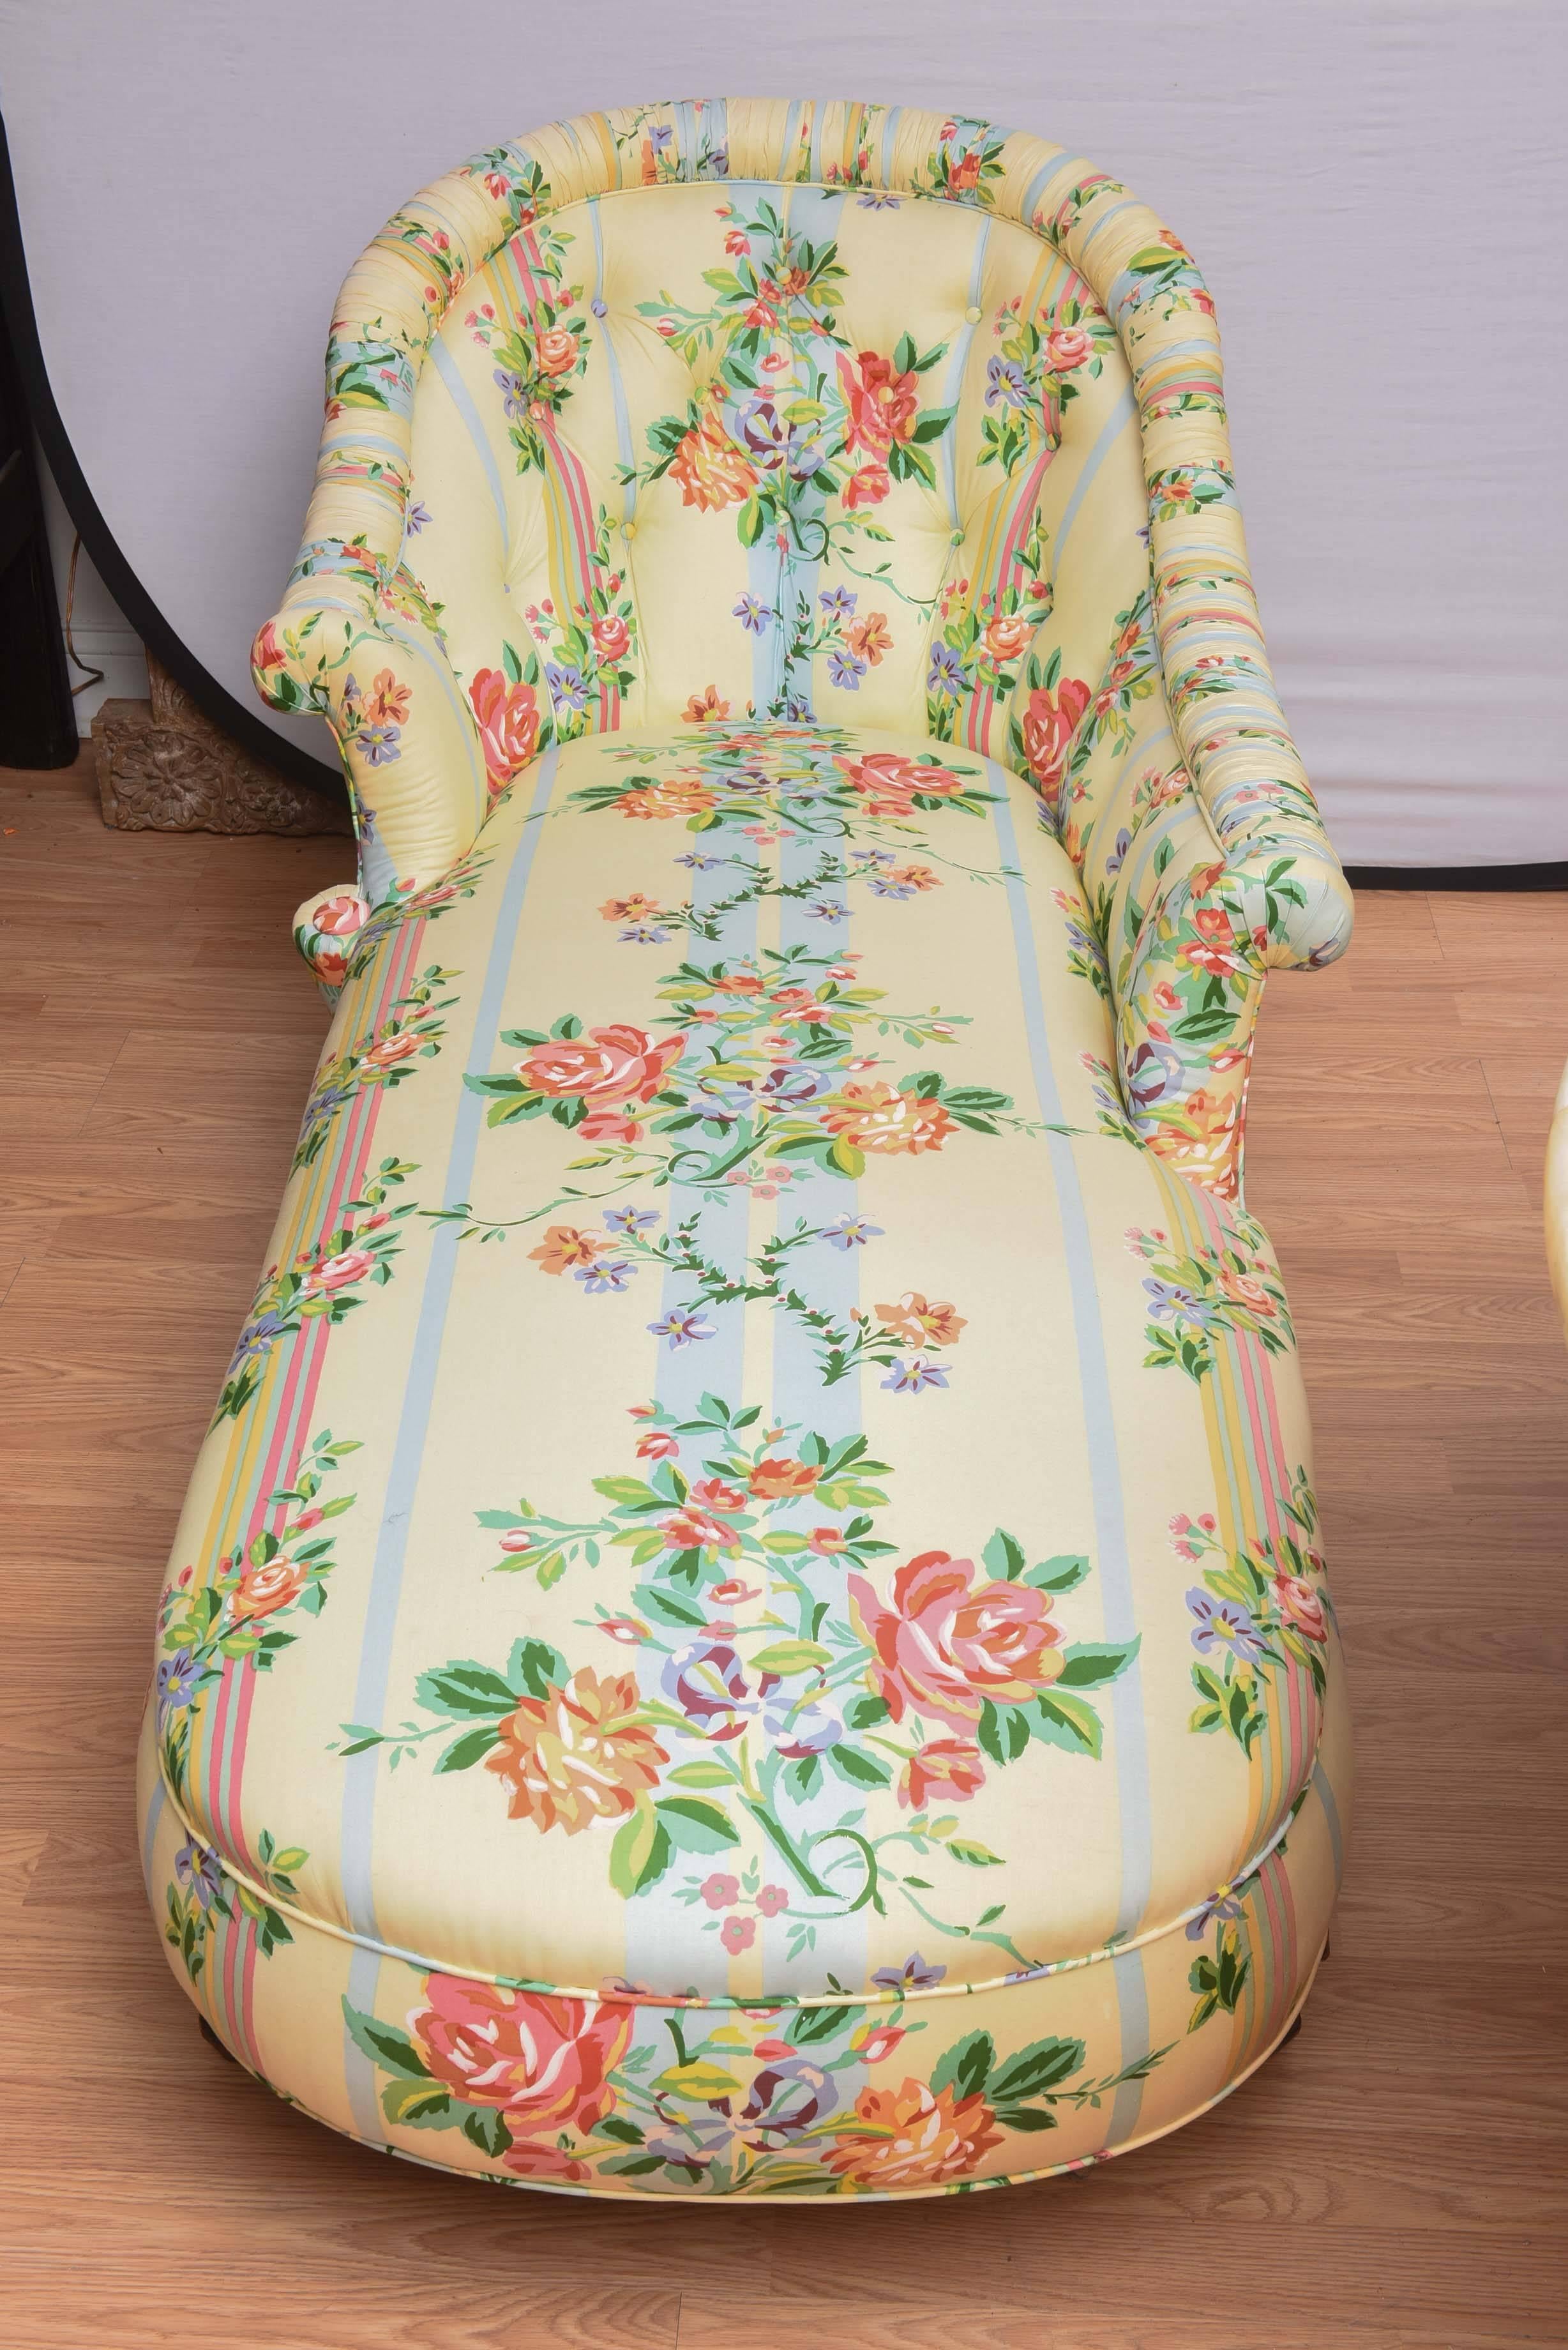 chaise lounge floral